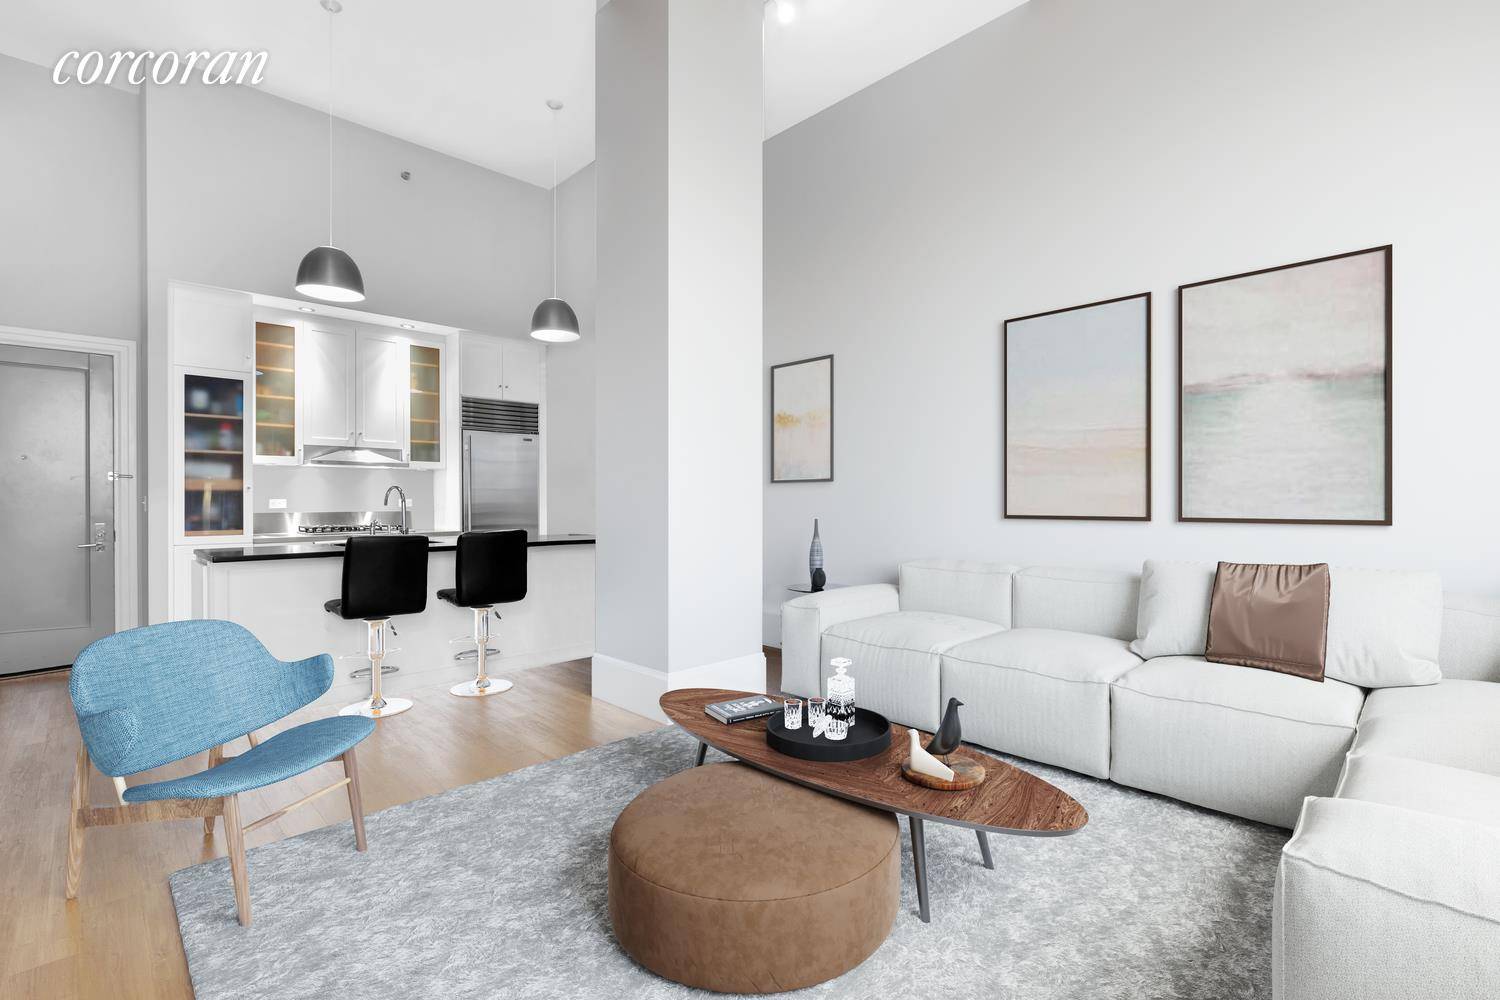 Welcome to 110 Livingston 3O This stunning loft features a sun flooded great room with soaring 20' ceilings, exquisite designer finishes, and is located in a heart of Brooklyn convenient ...